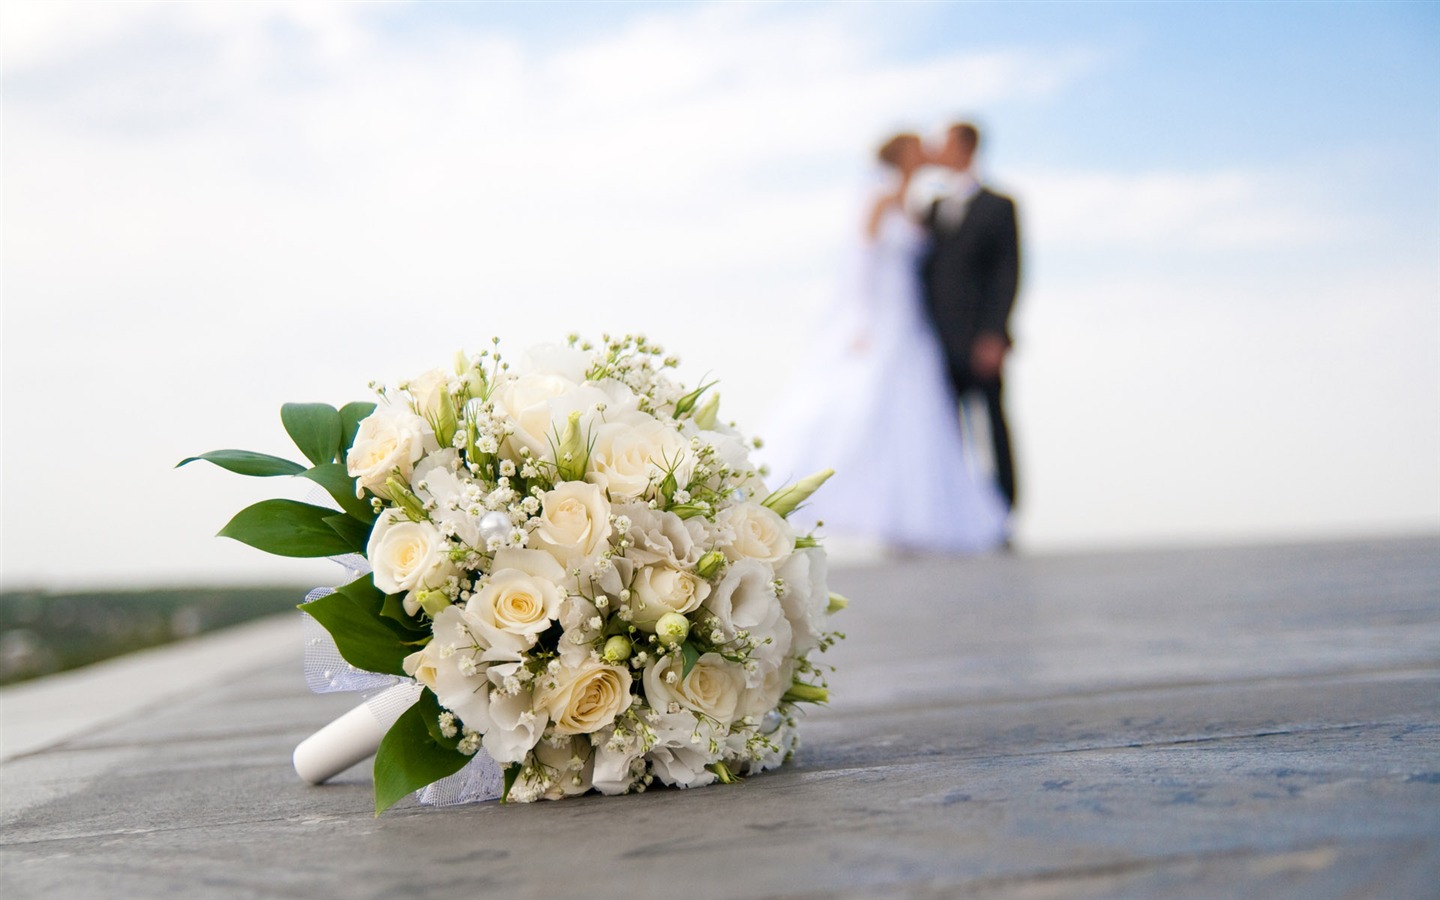 Weddings and Flowers wallpaper (2) #18 - 1440x900